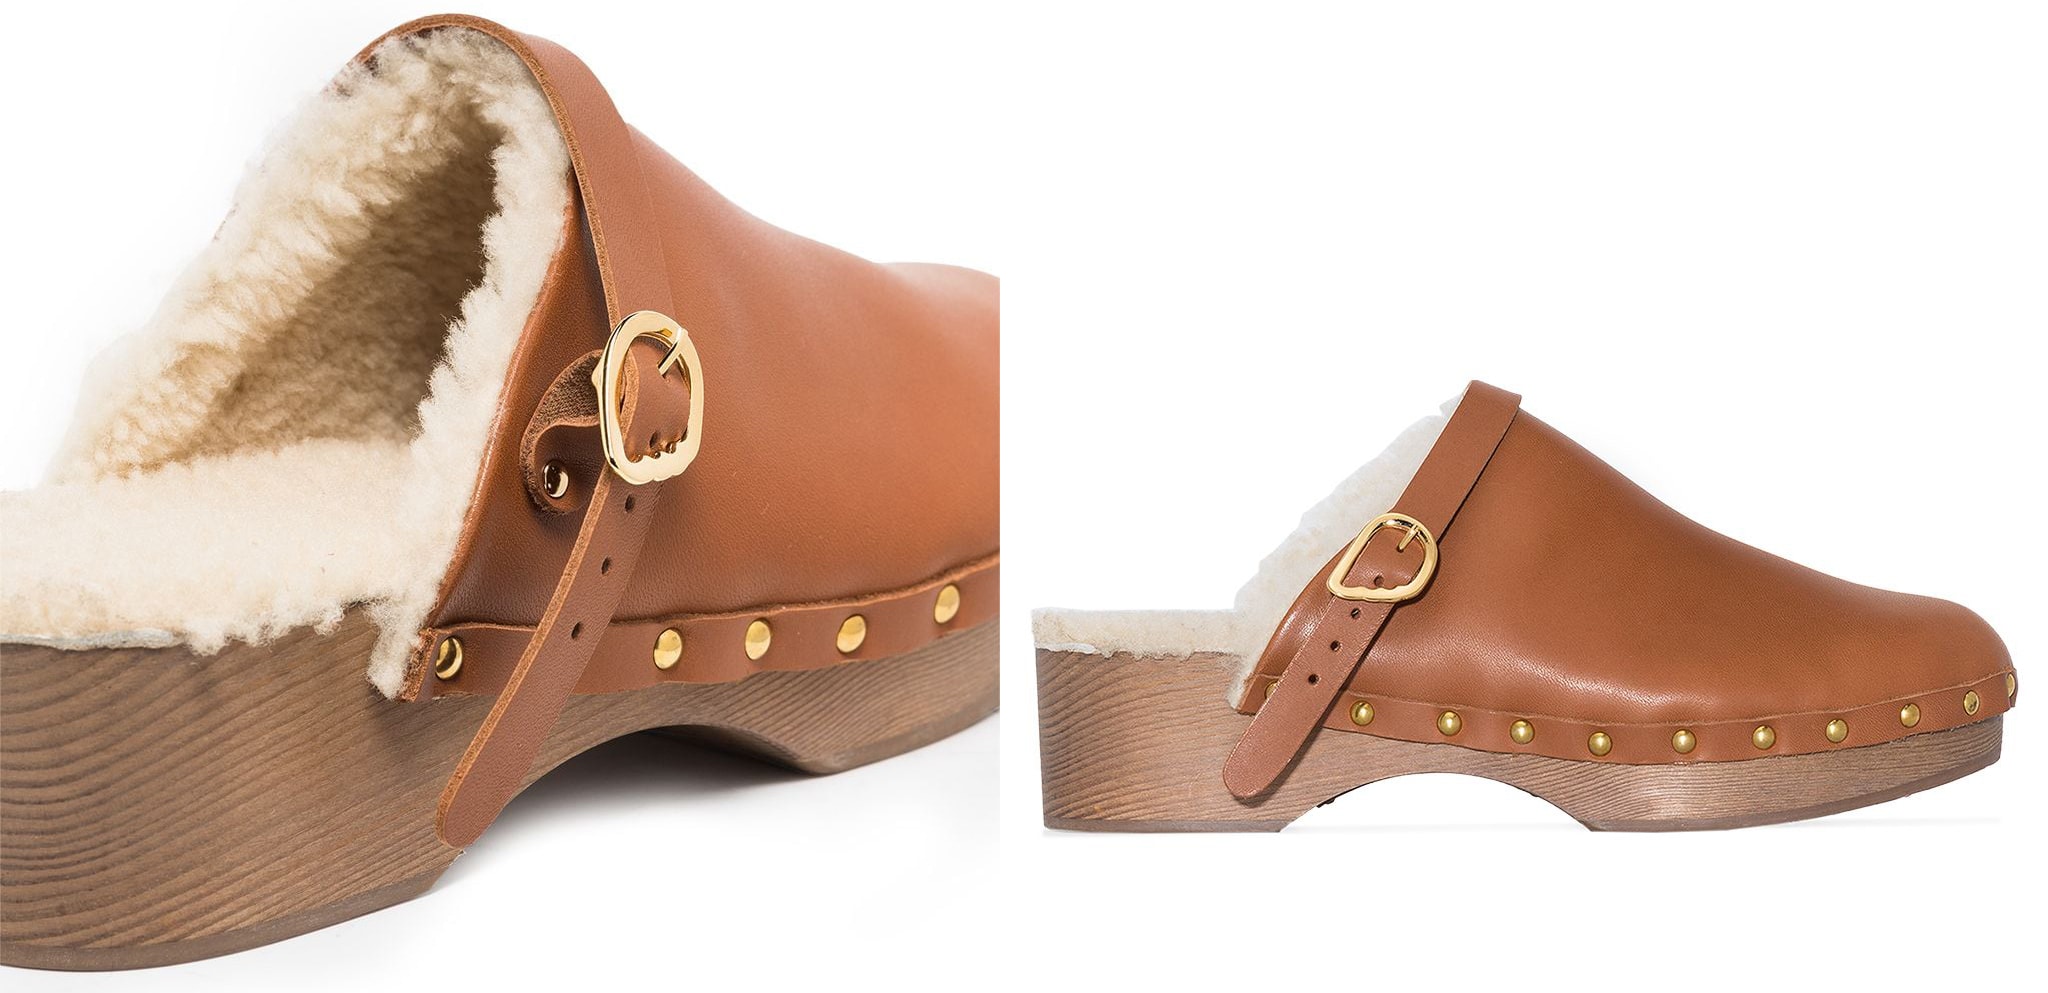 Handmade from brown leather, these Spring/Summer 2022 clogs have gold-tone studs along the sides and a buckle-fastening strap for a practical fit